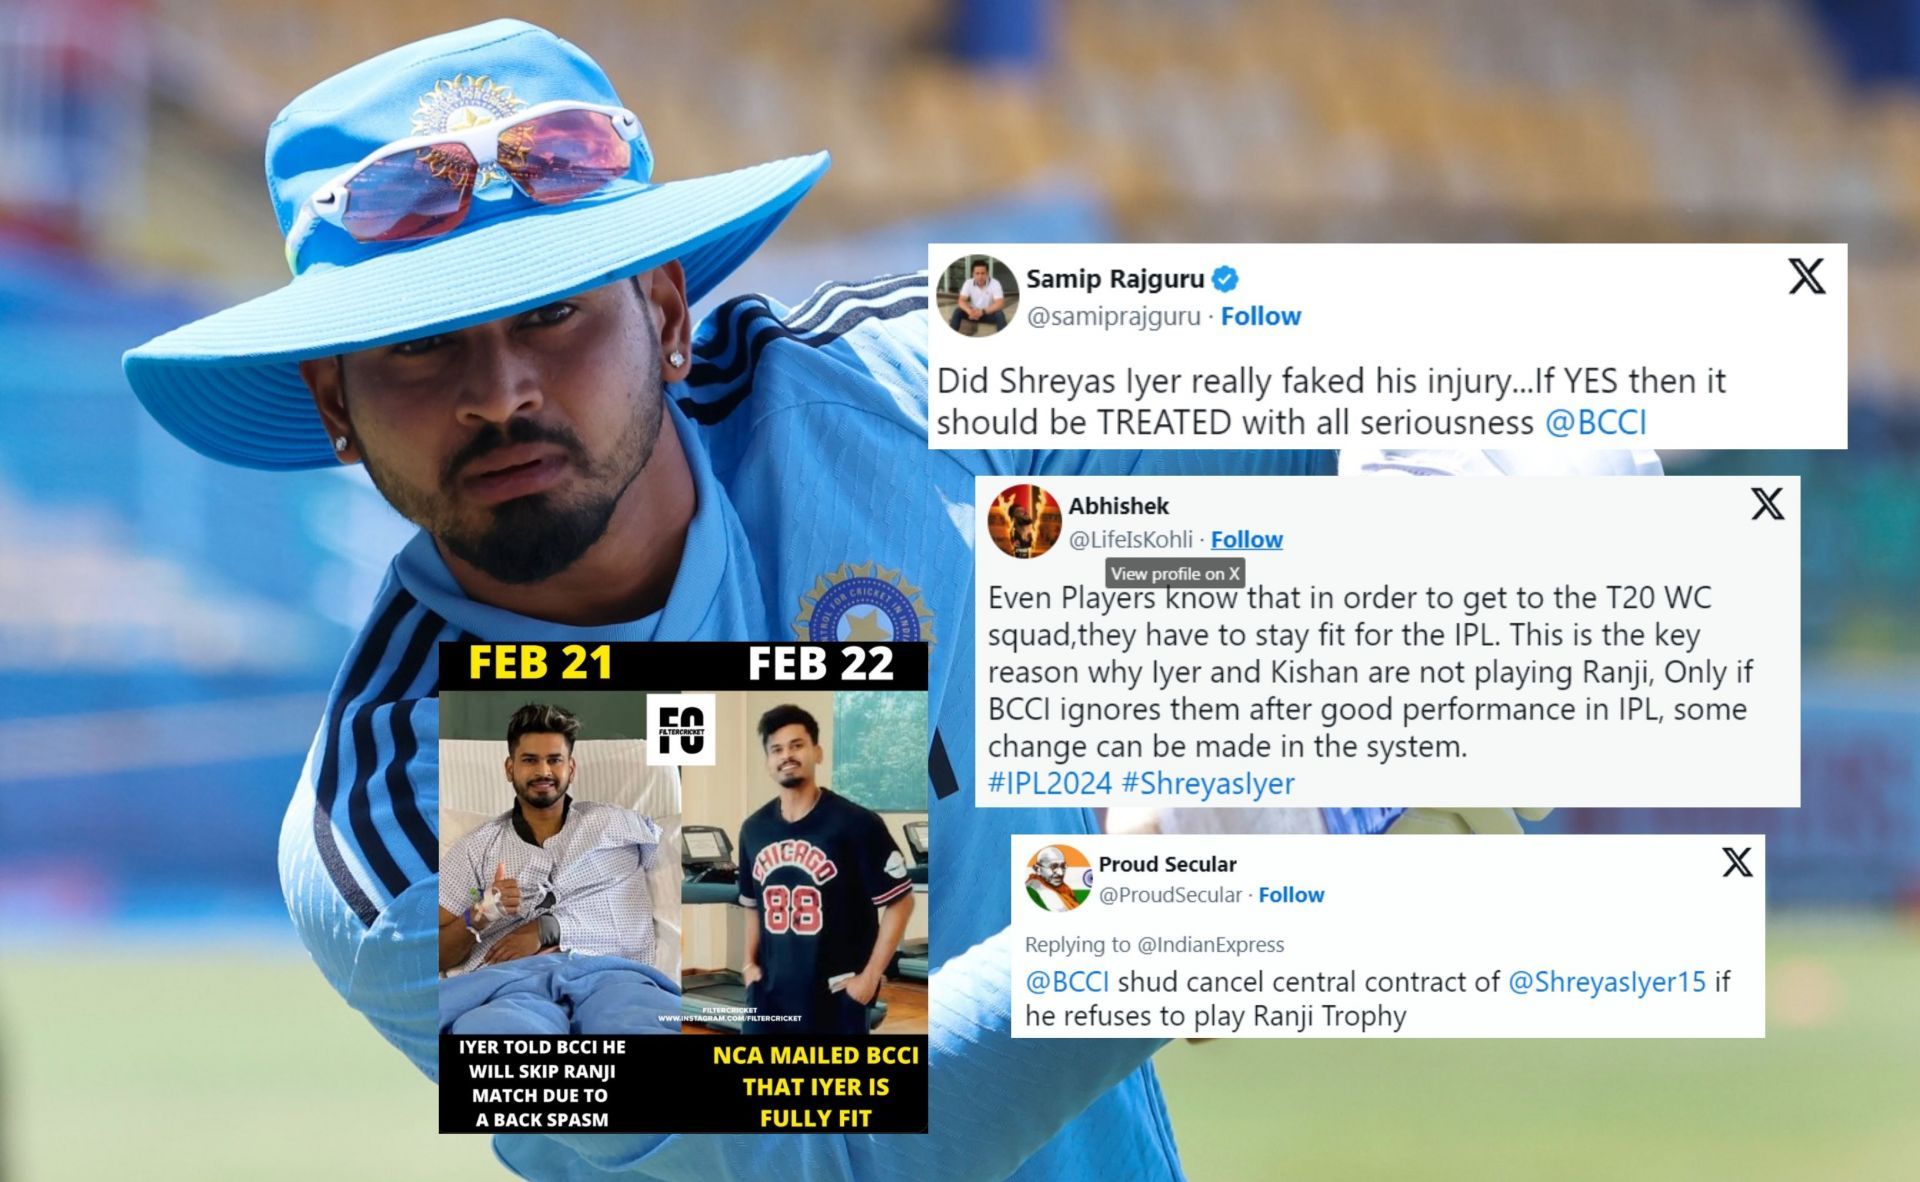 Fans react to controversy surrounding Shreyas Iyer